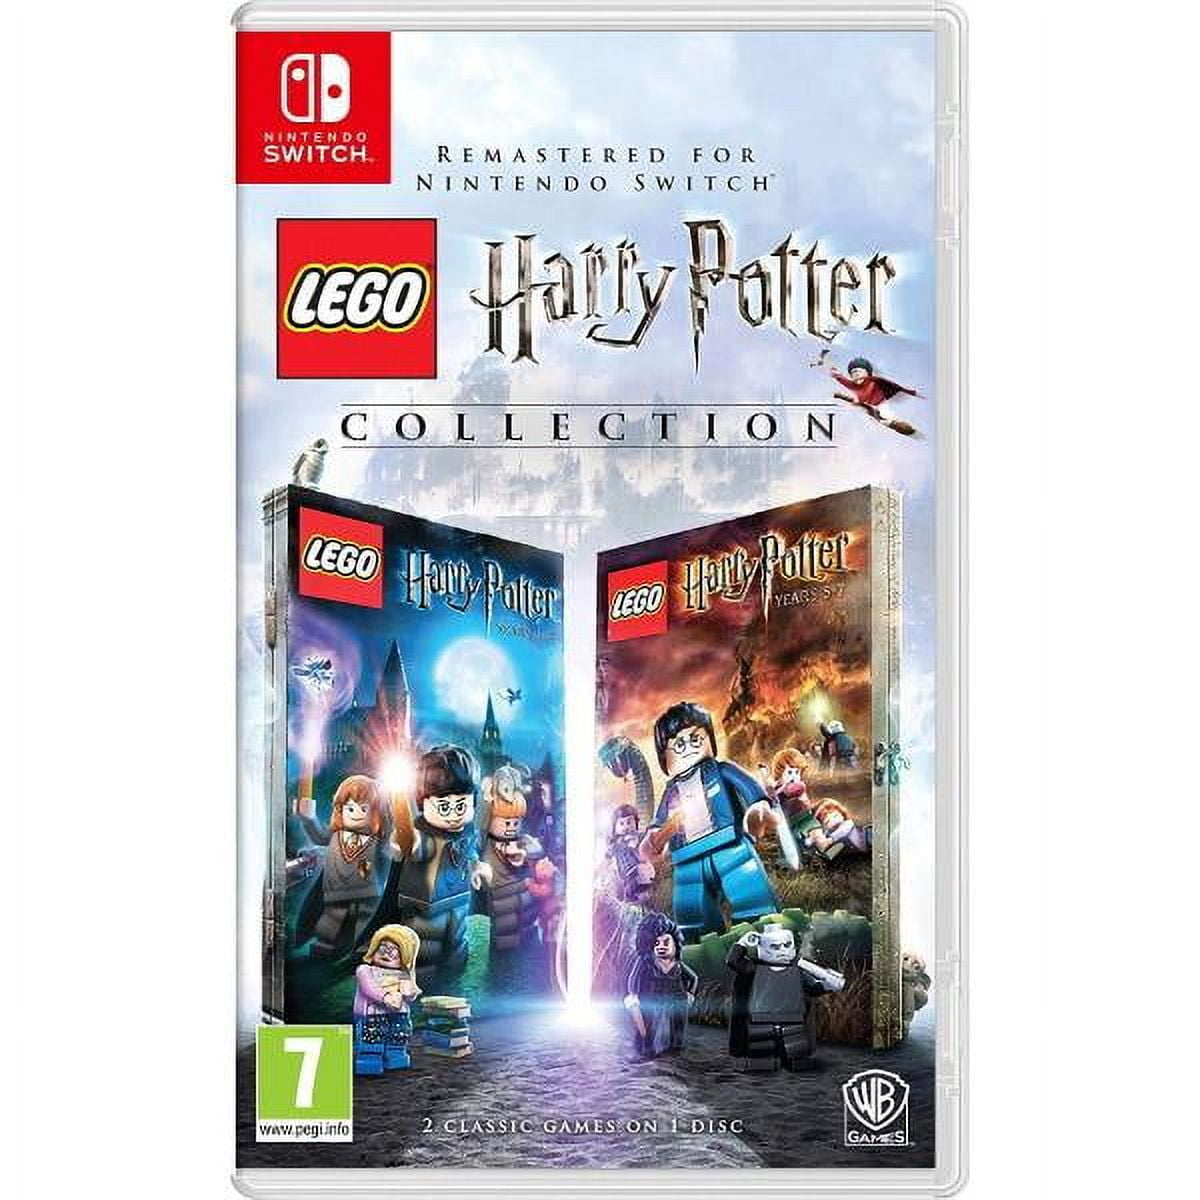  LEGO Harry Potter: Years 1-4 - Playstation 3 : Toys